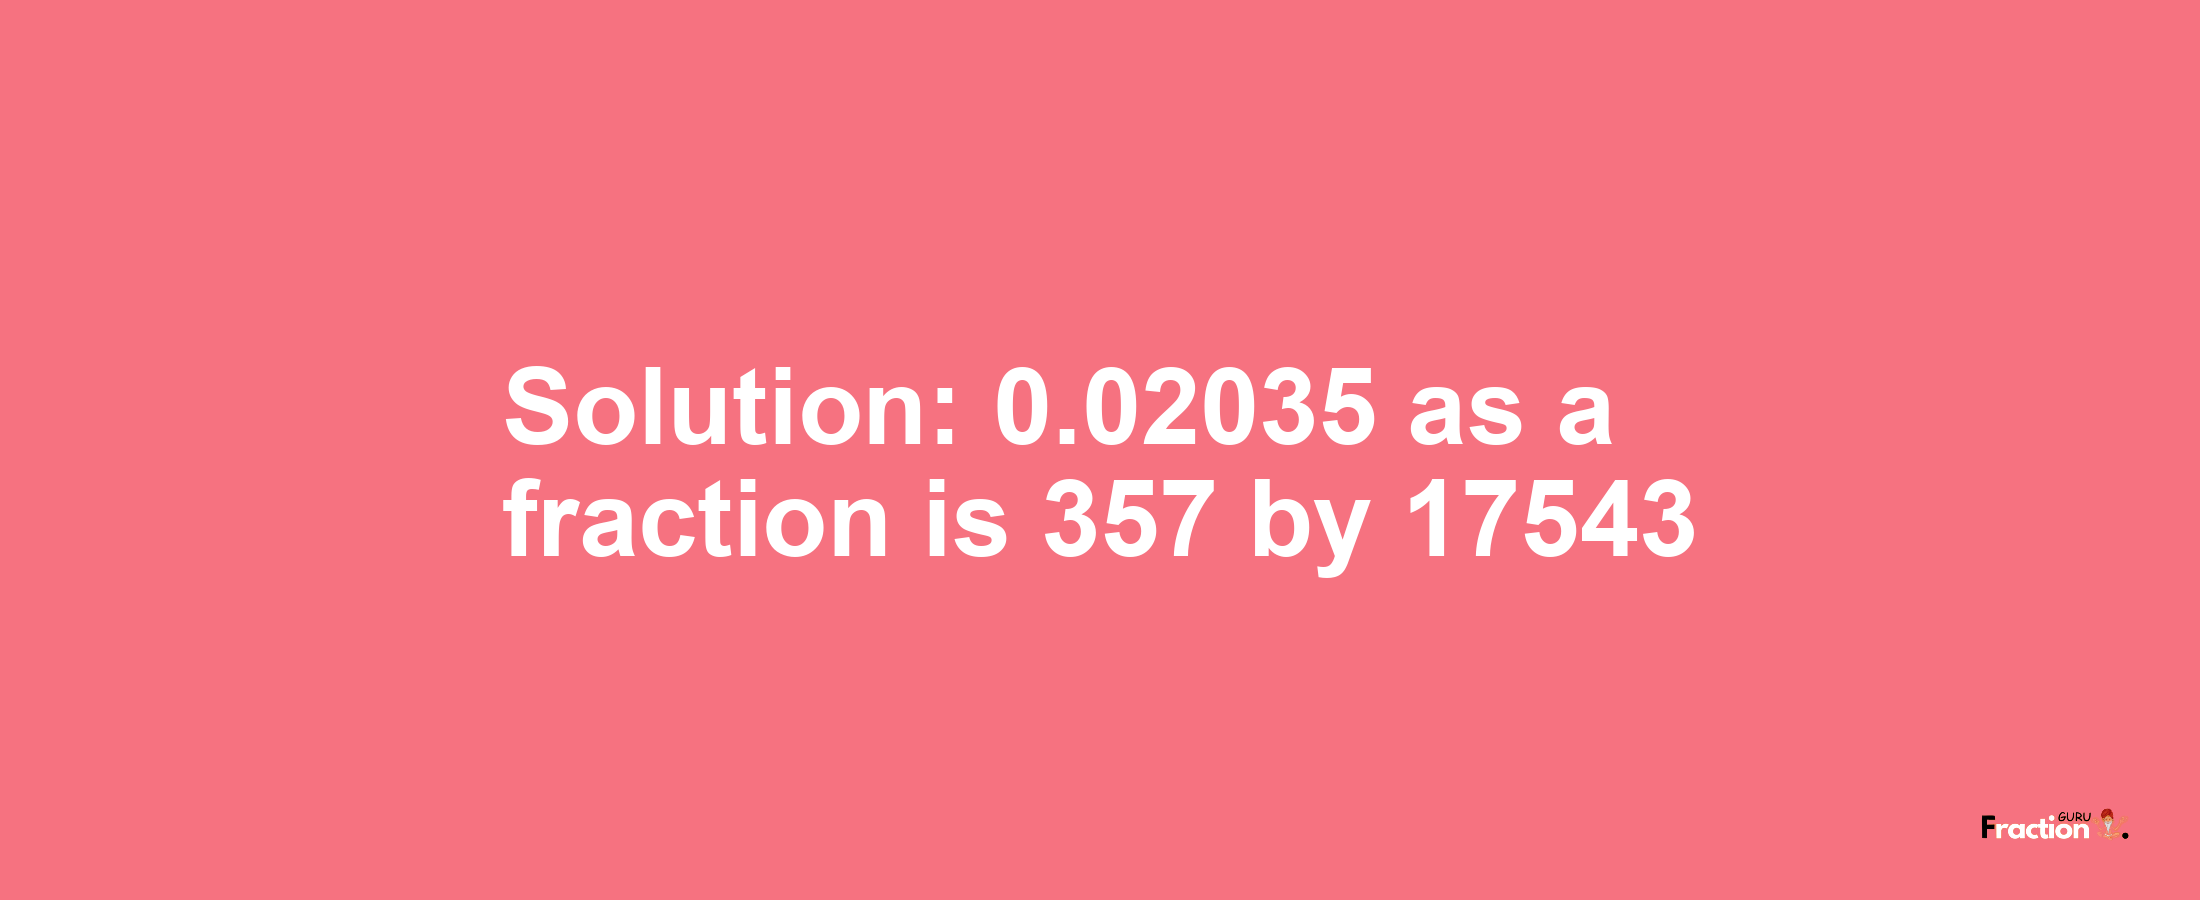 Solution:0.02035 as a fraction is 357/17543